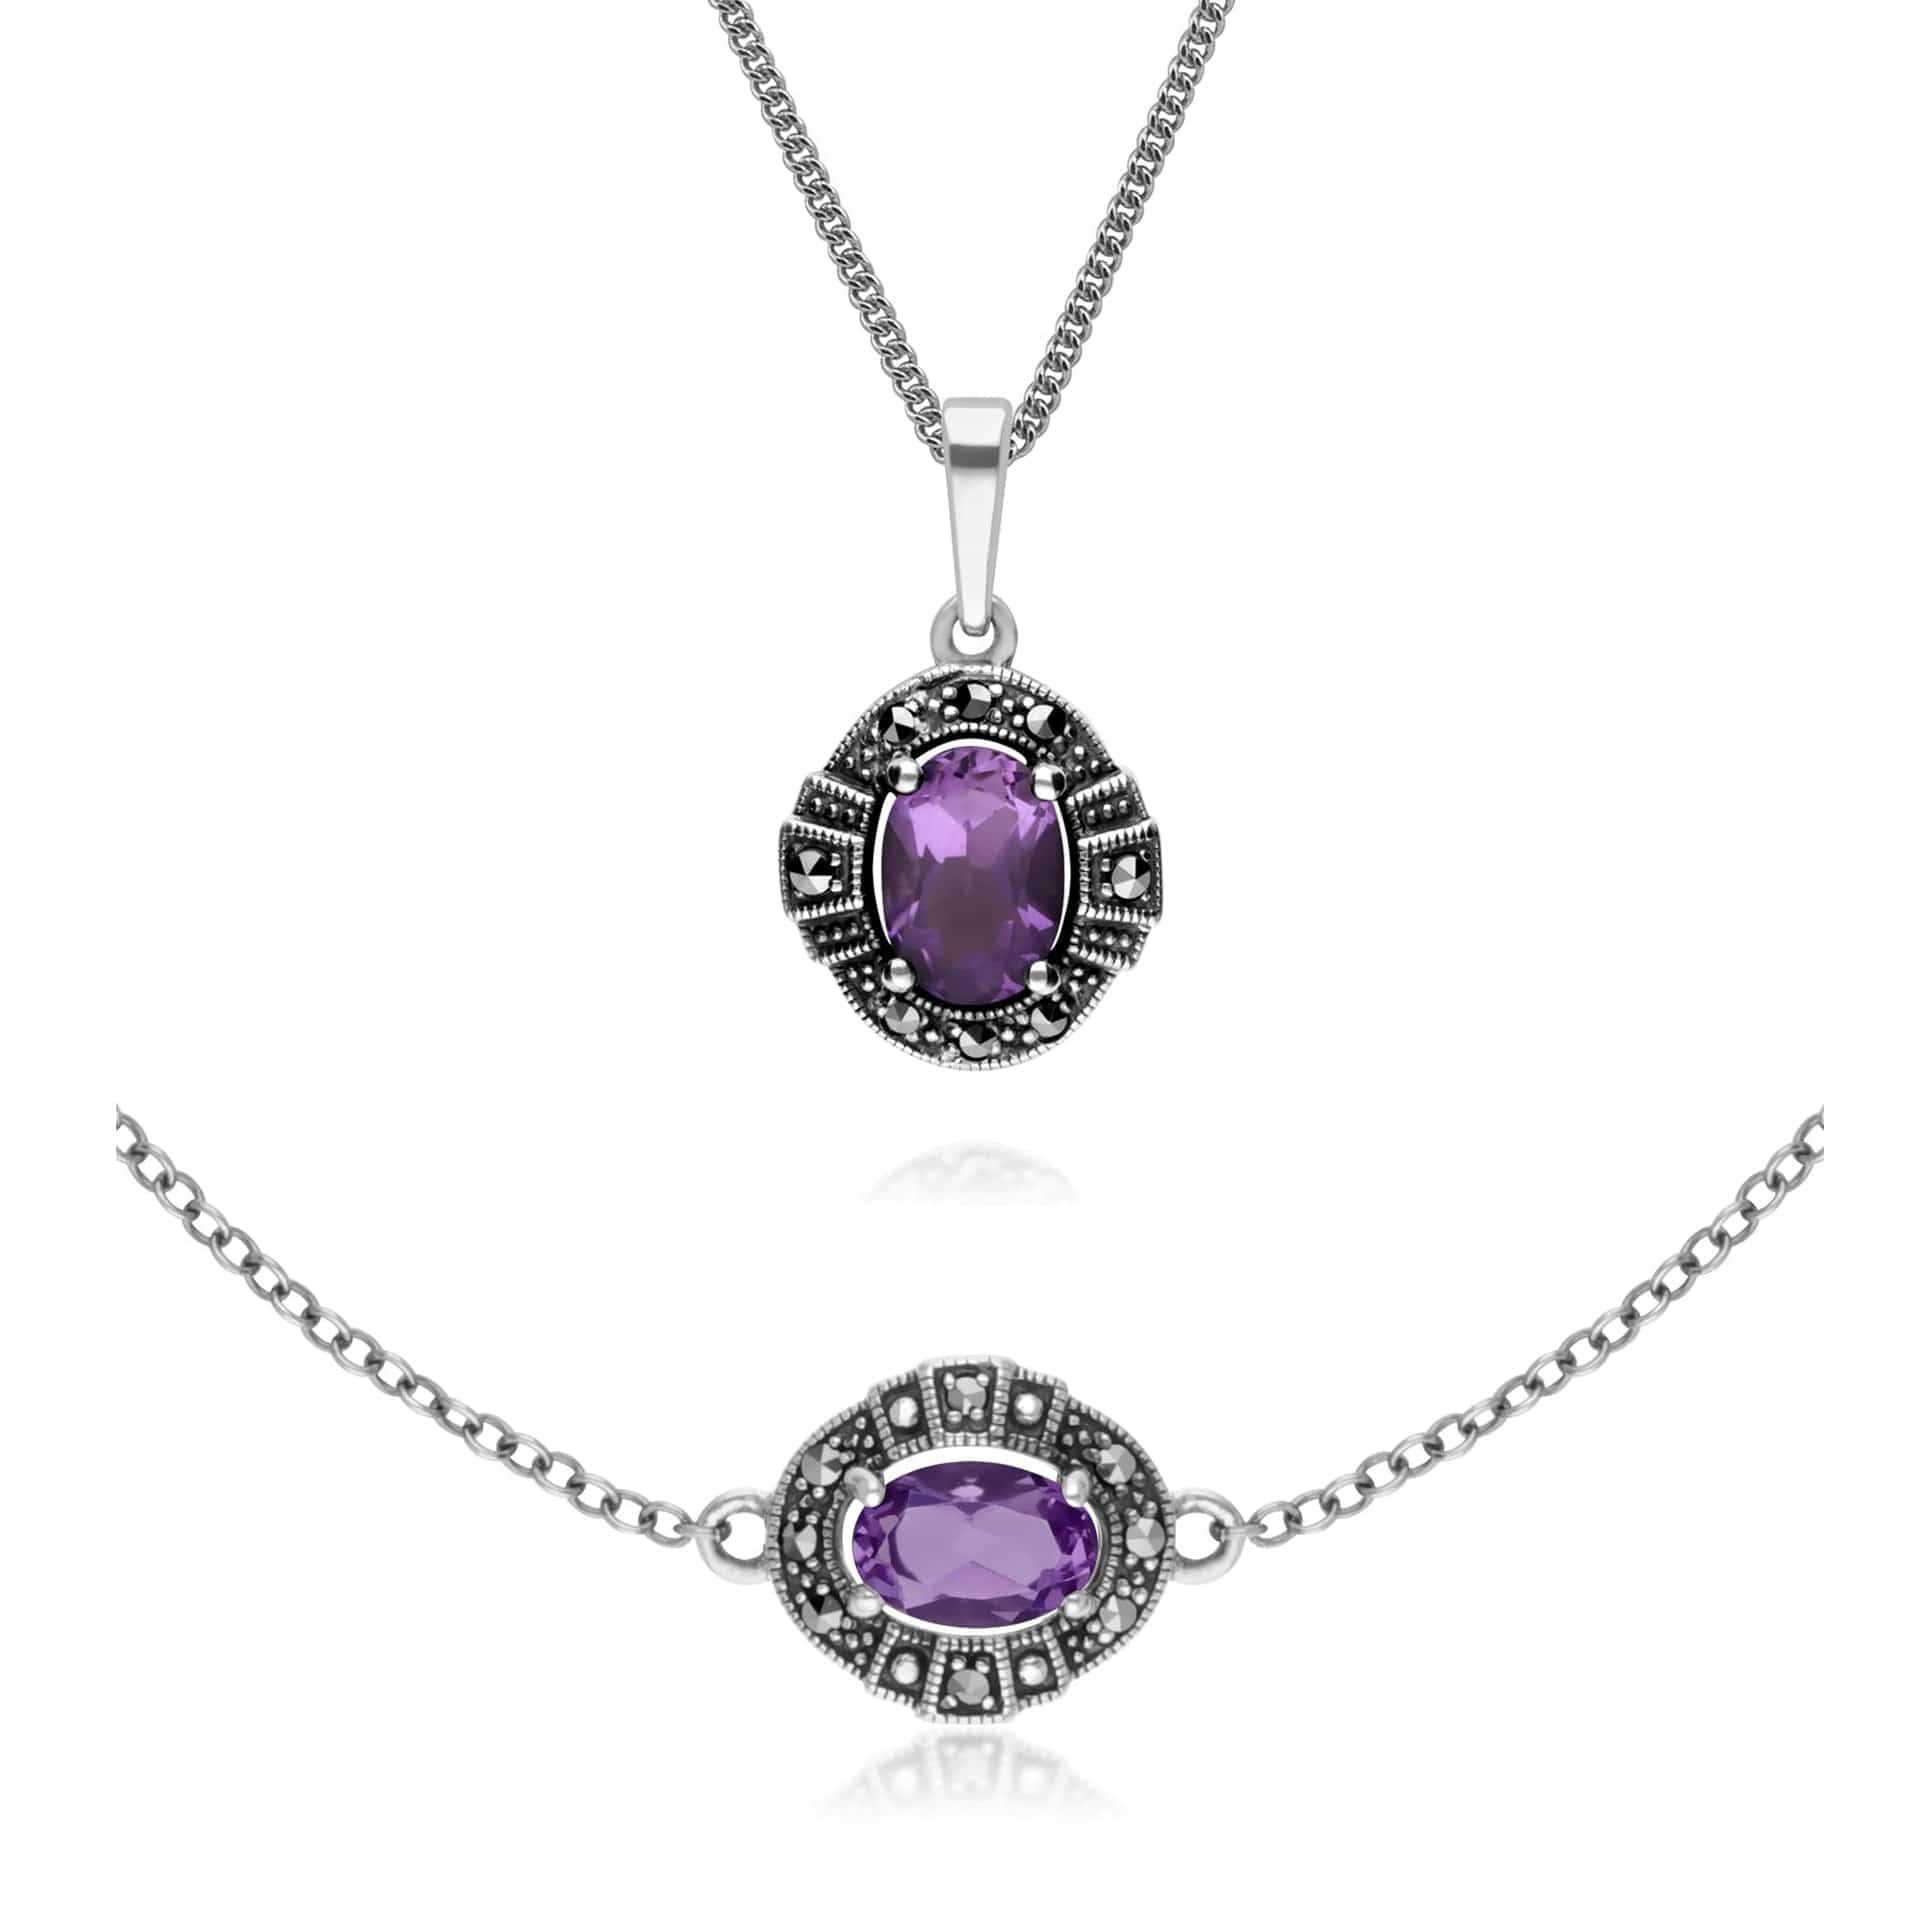 214P303302925-214L165402925 Art Deco Style Oval Amethyst and Marcasite Cluster Bracelet & Pendant Set in 925 Sterling Silver 1